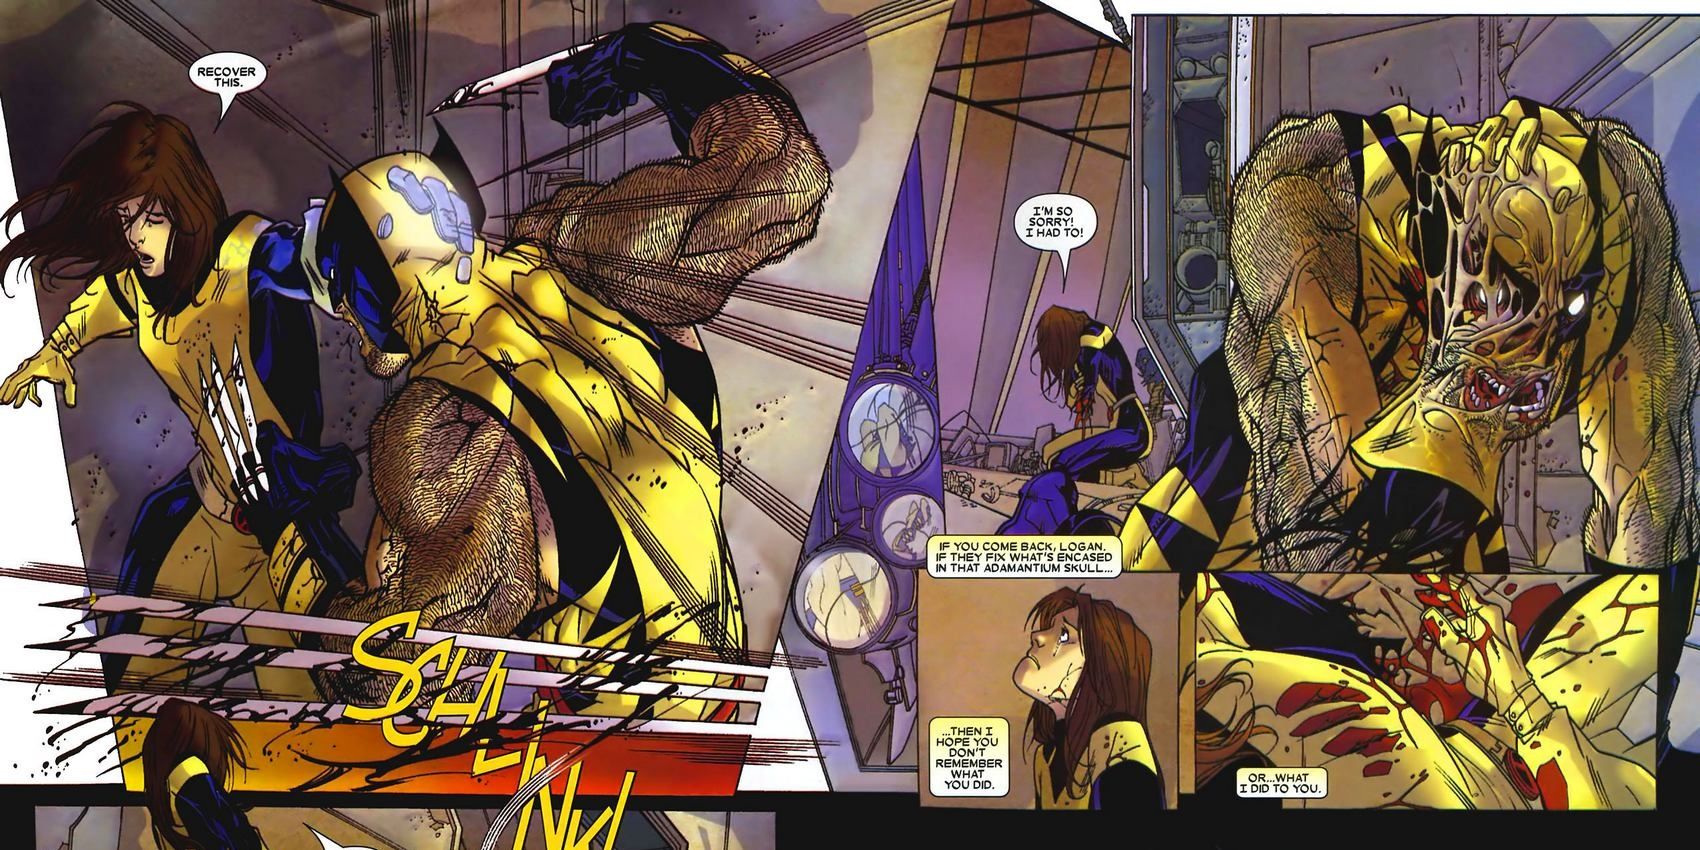 Kitty Pryde defeats Wolverine